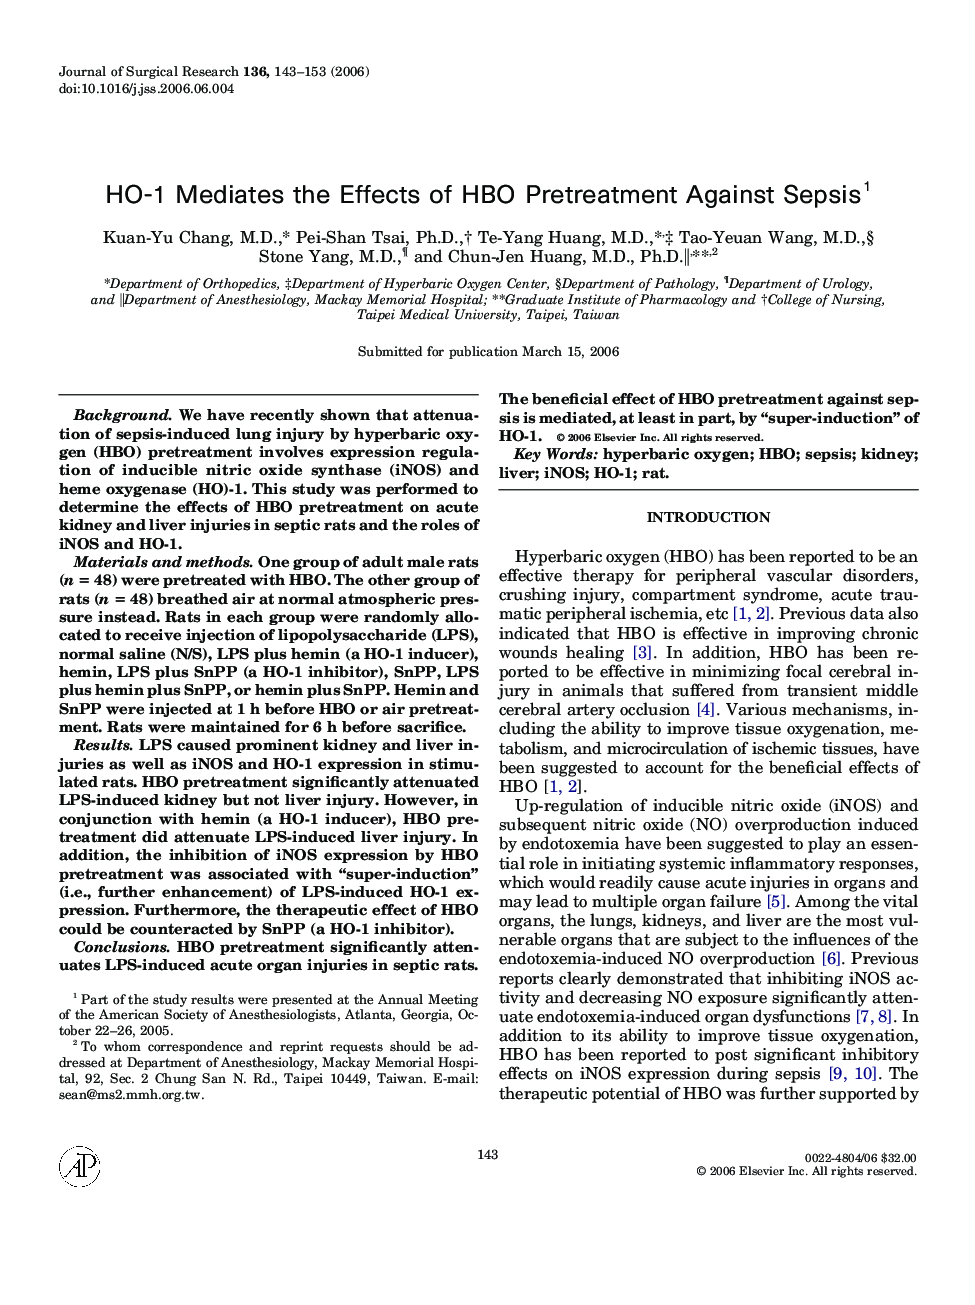 HO-1 Mediates the Effects of HBO Pretreatment Against Sepsis